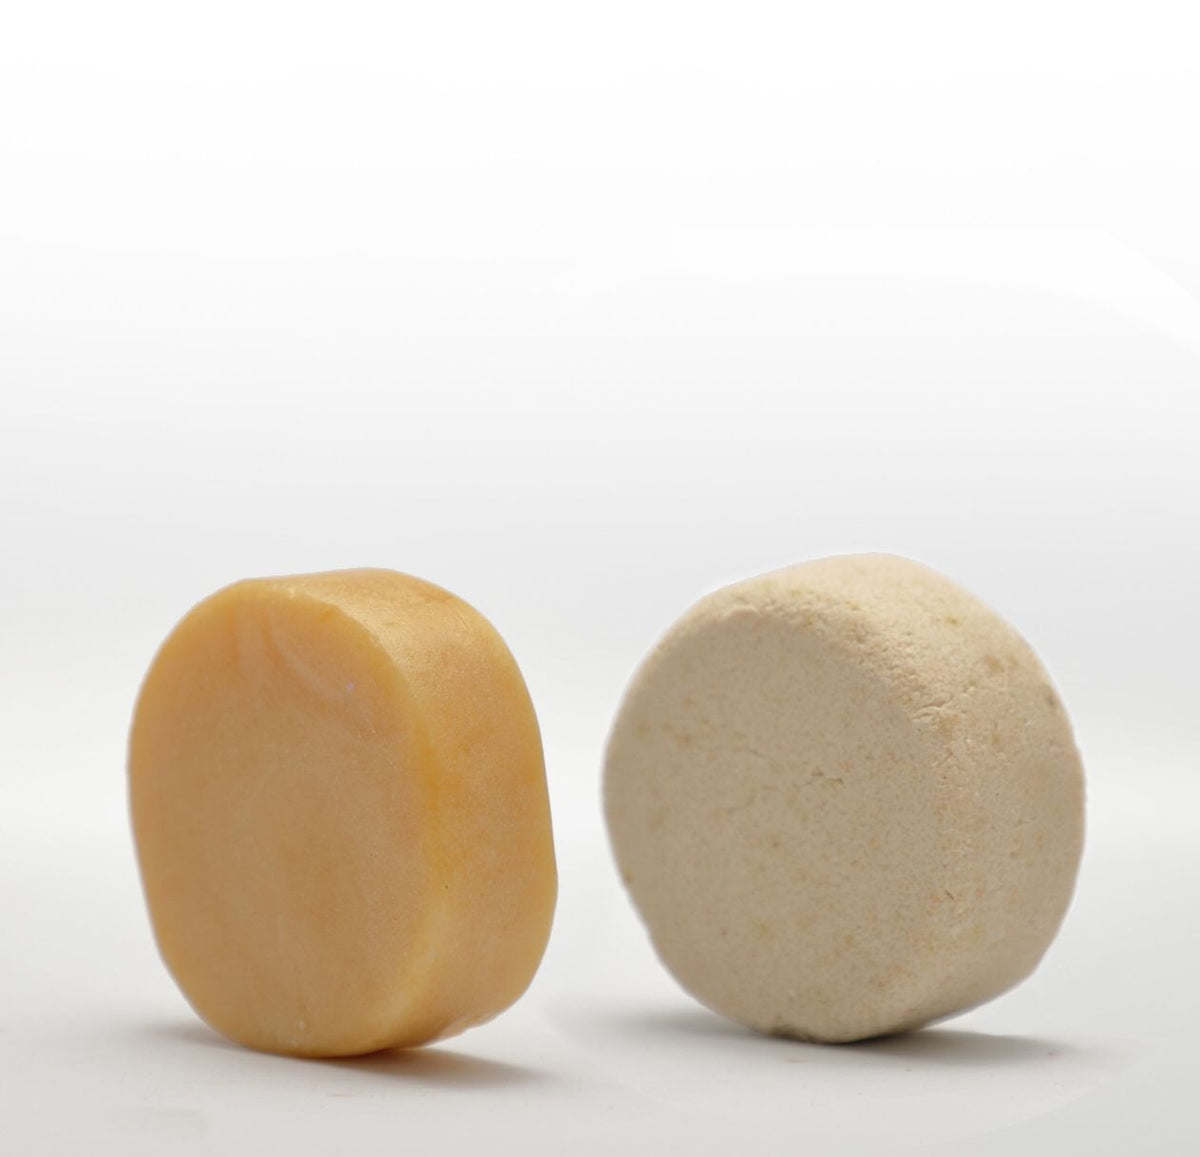 Two Shampoo Bar & Conditioner Bar Bundles on a white surface.